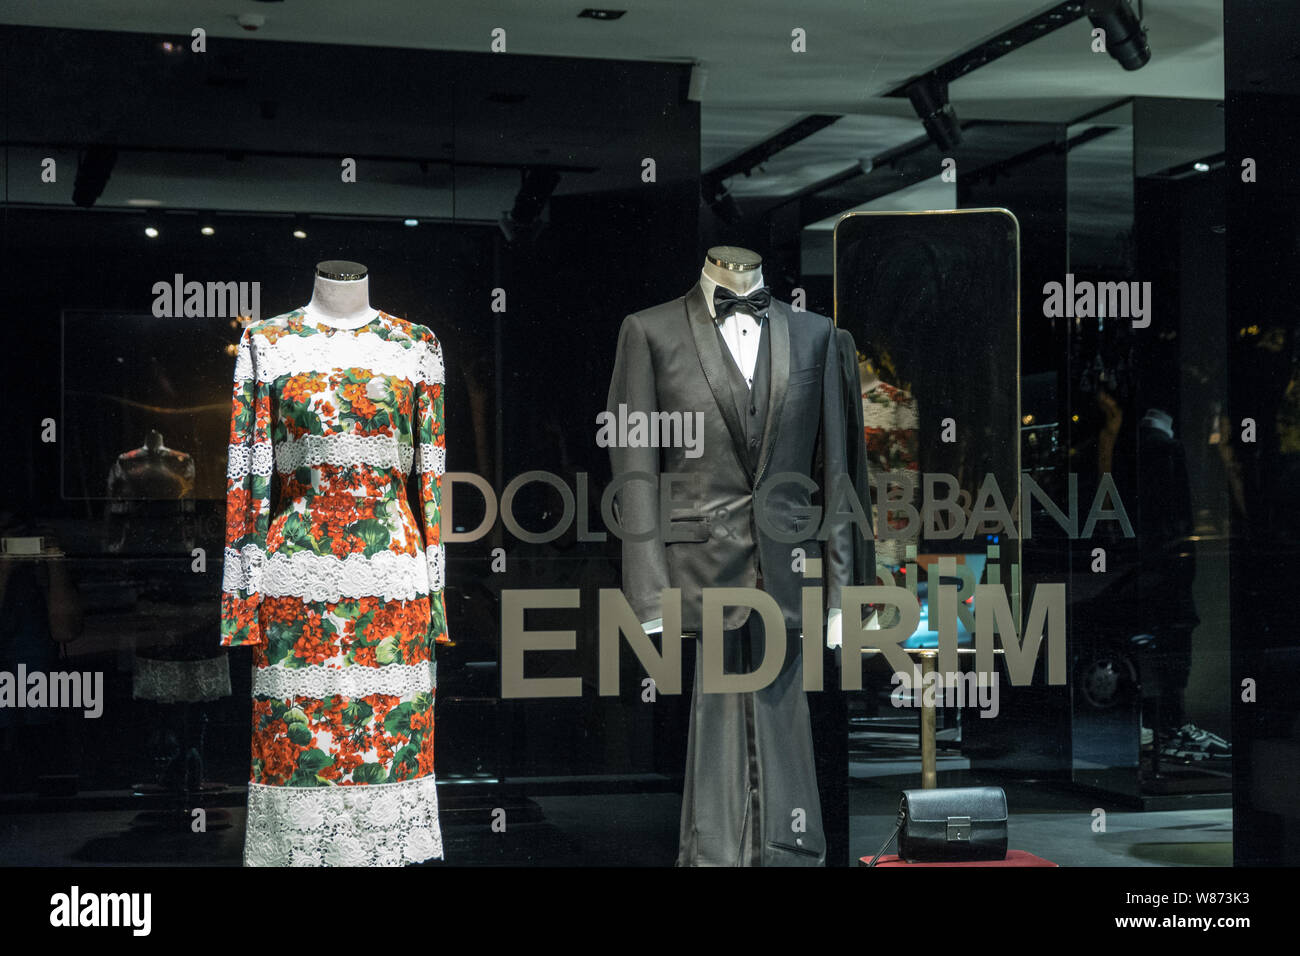 Dolce & gabbana shop hi-res stock photography and images - Page 5 - Alamy